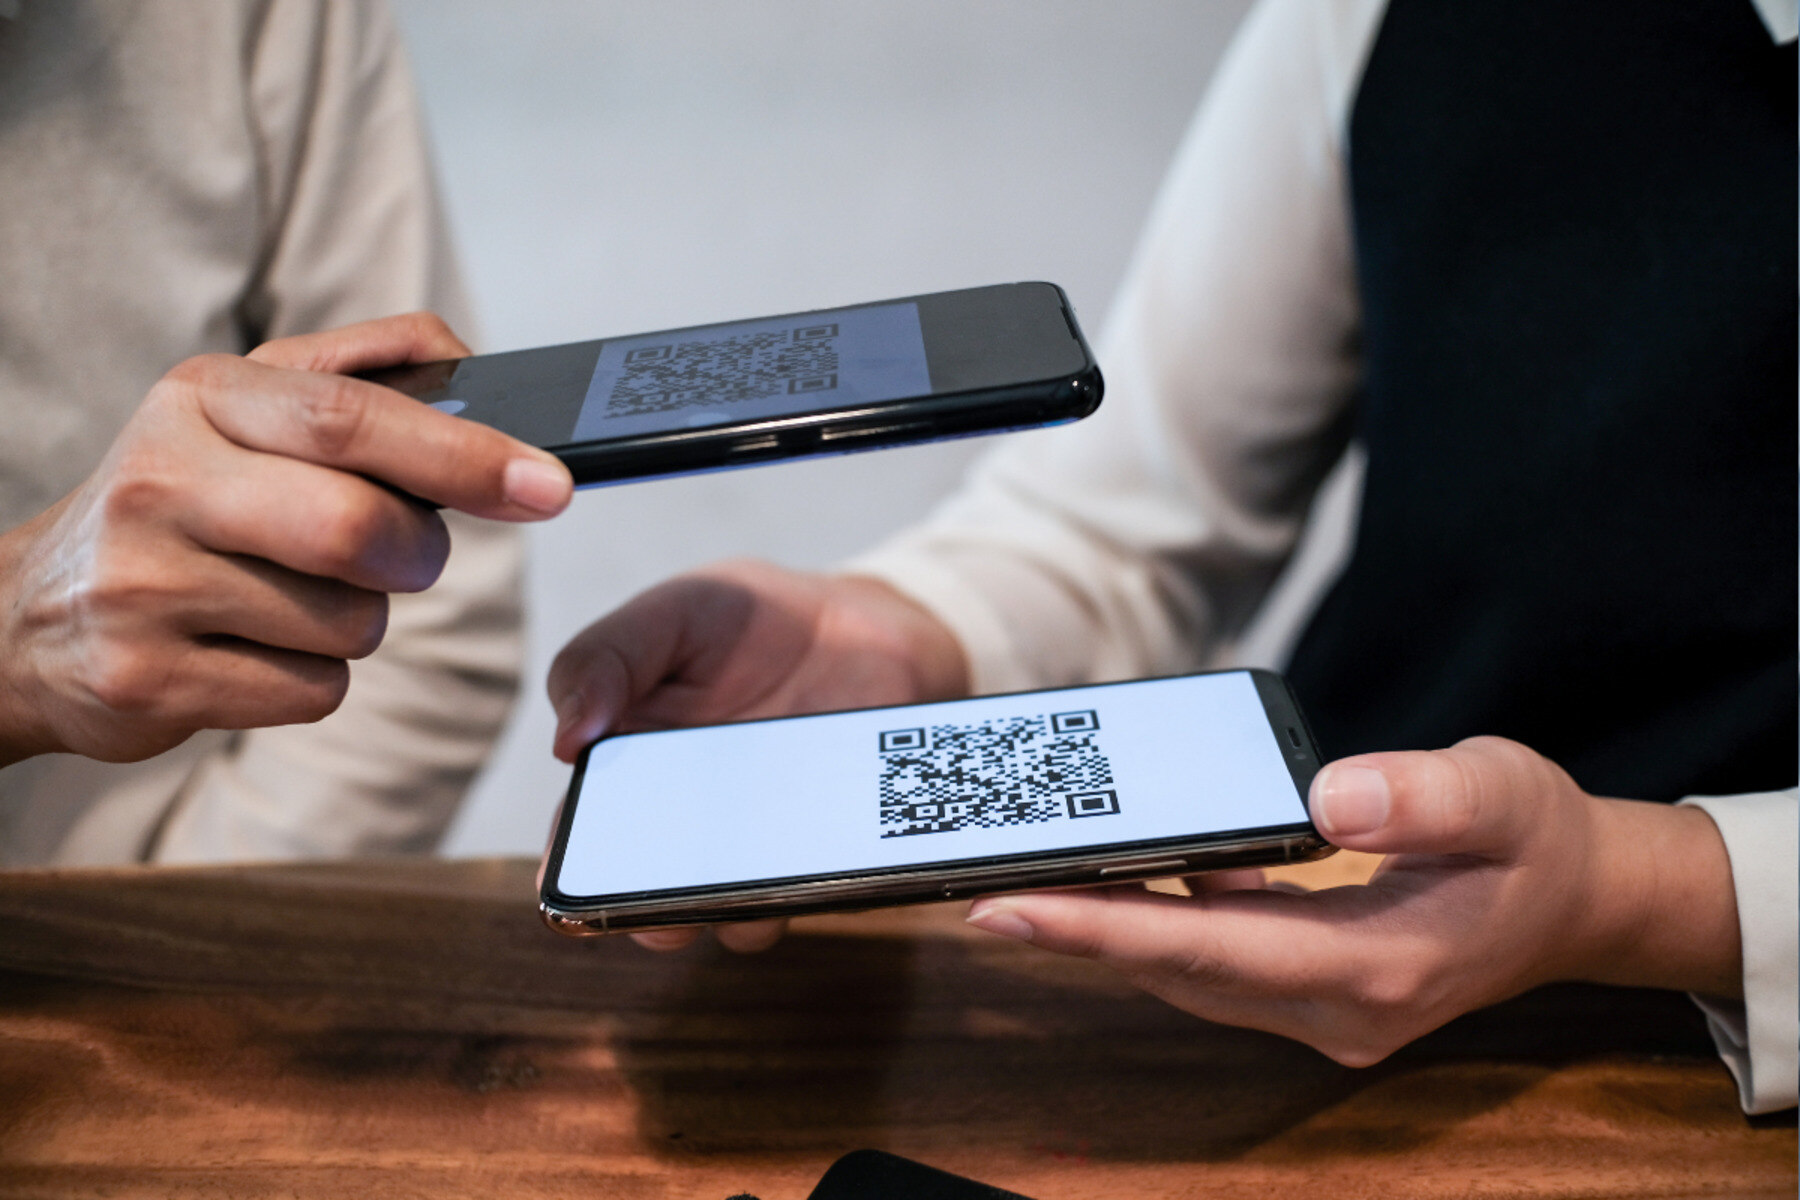 scanning-qr-codes-on-oneplus-nord-quick-guide